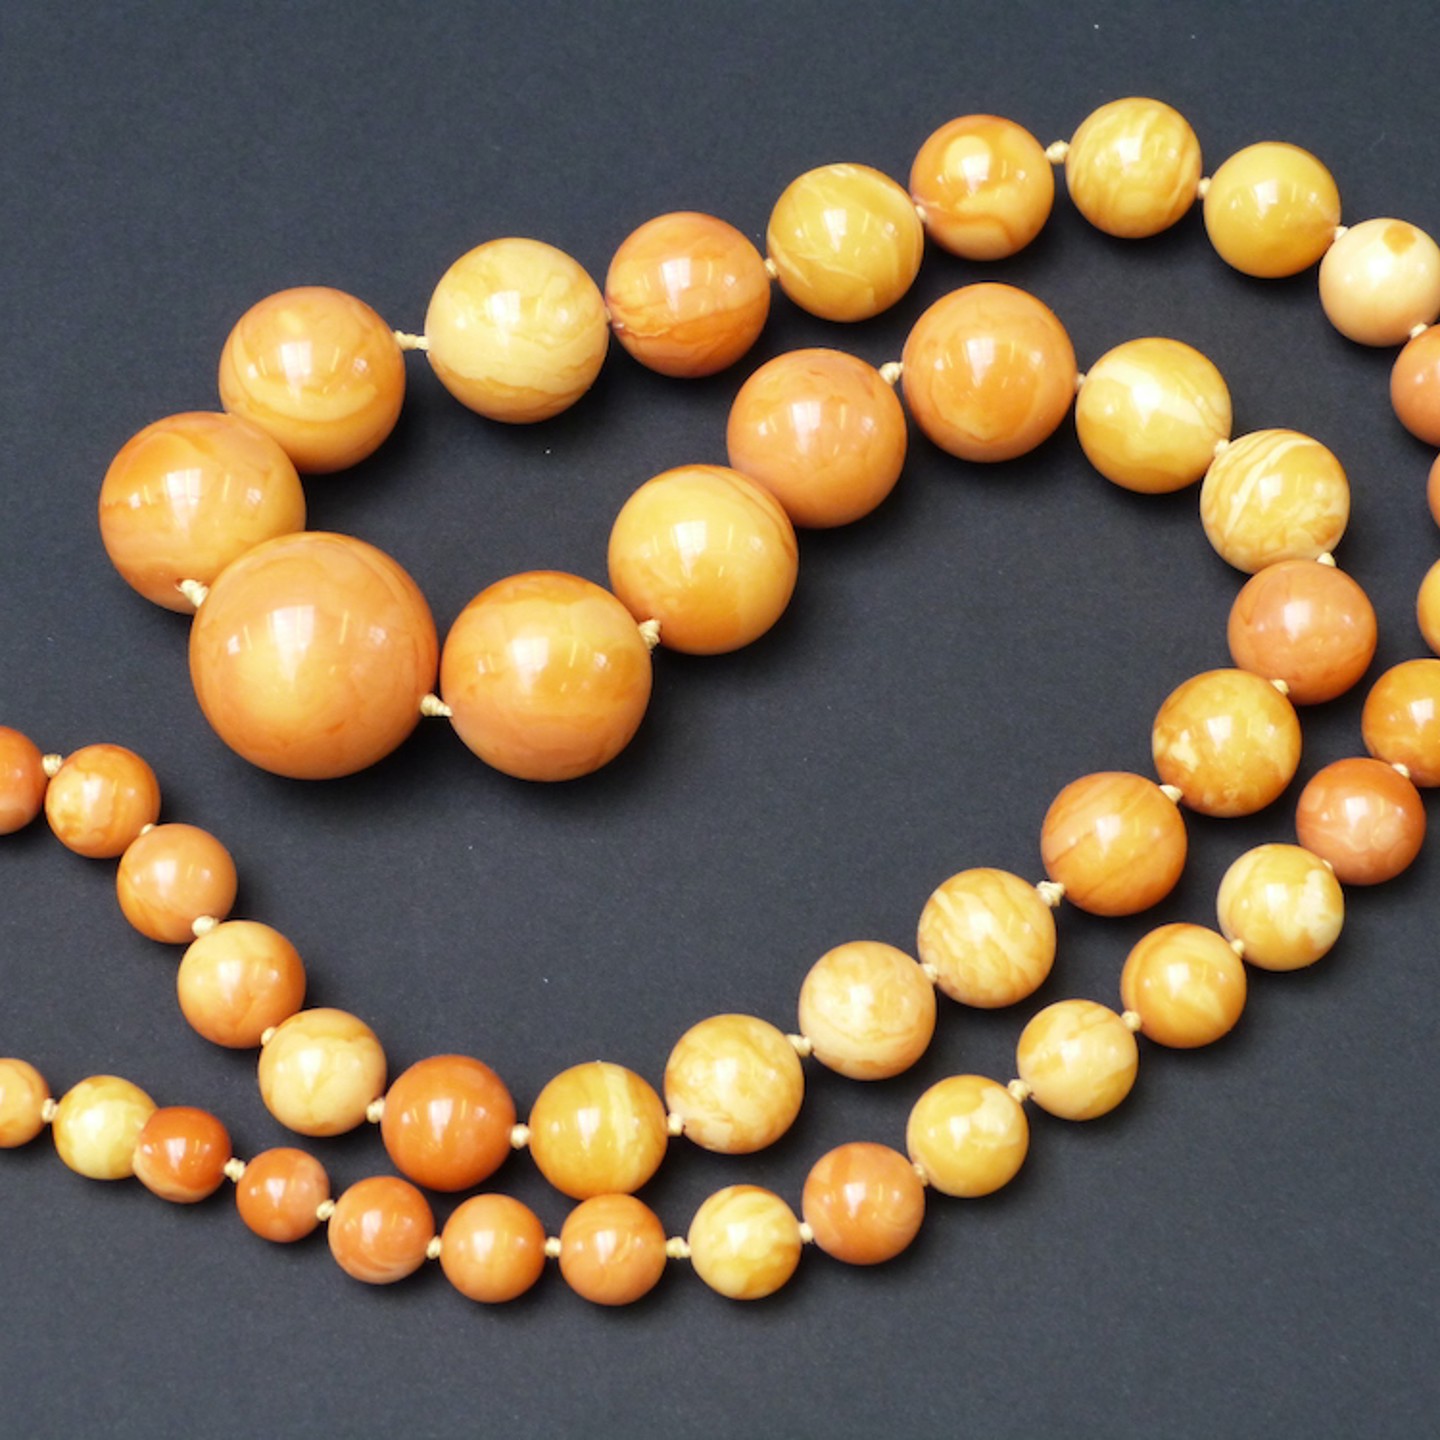 A Large Amber Necklace Of 49 Spherical Beads Sold For £5200